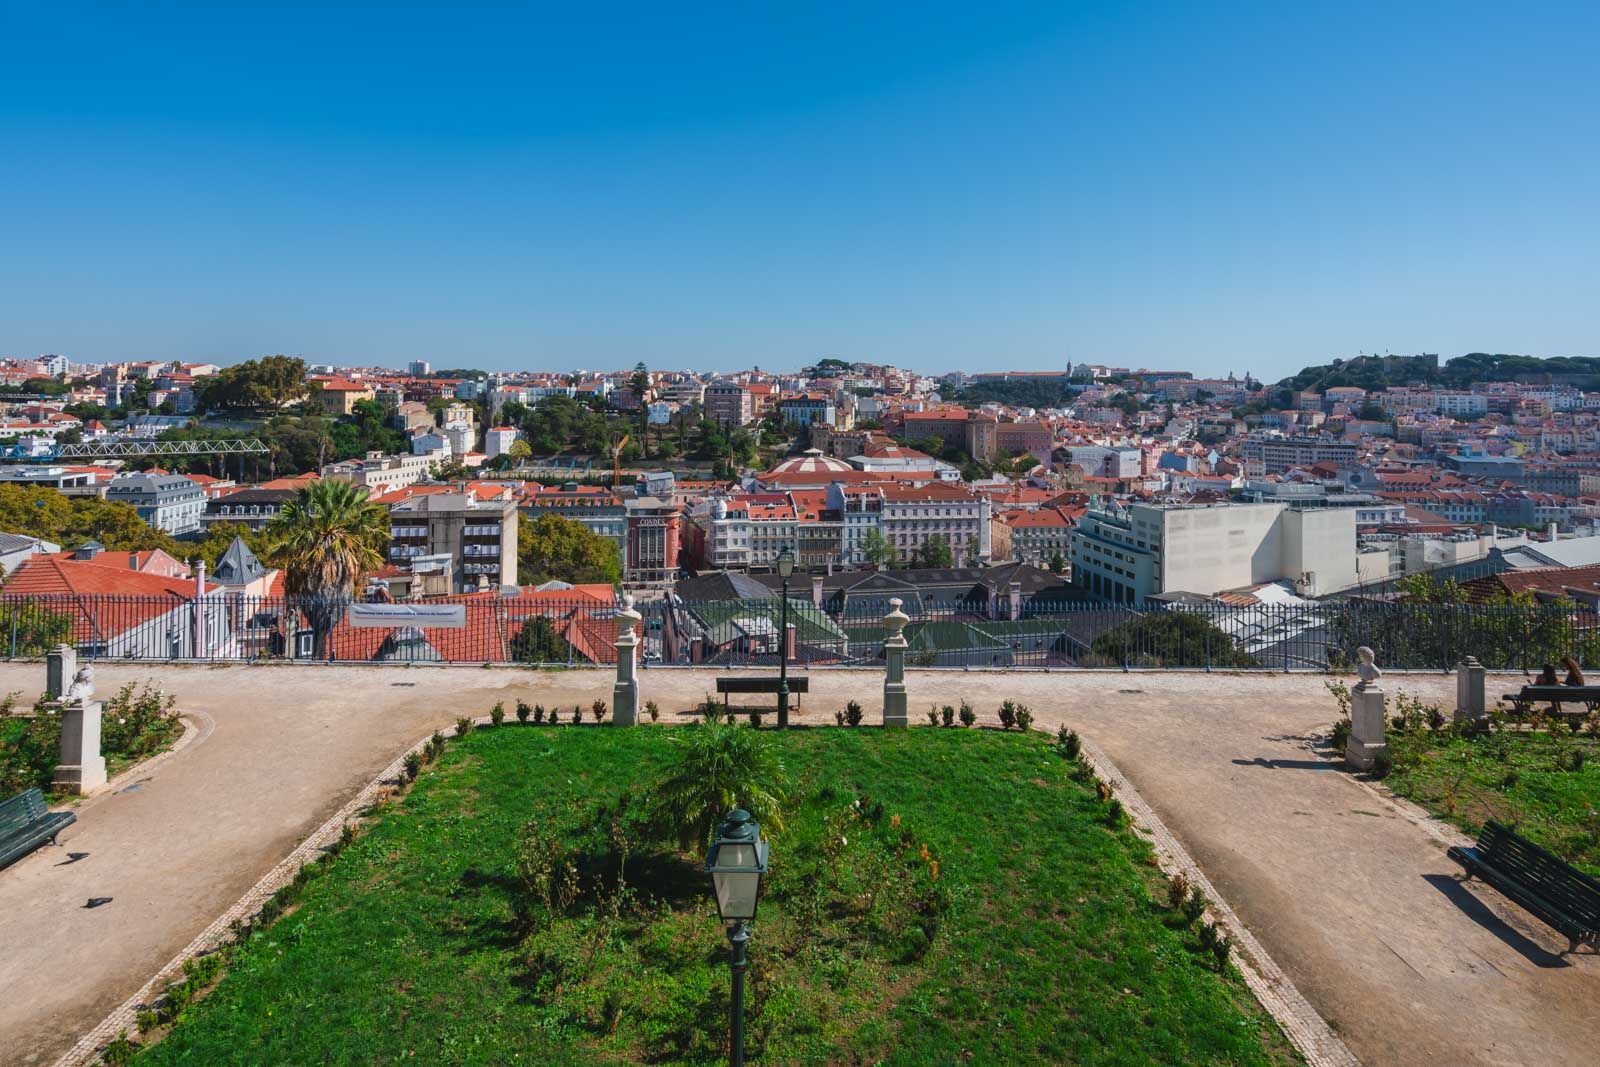 Top things to do in Lisbon